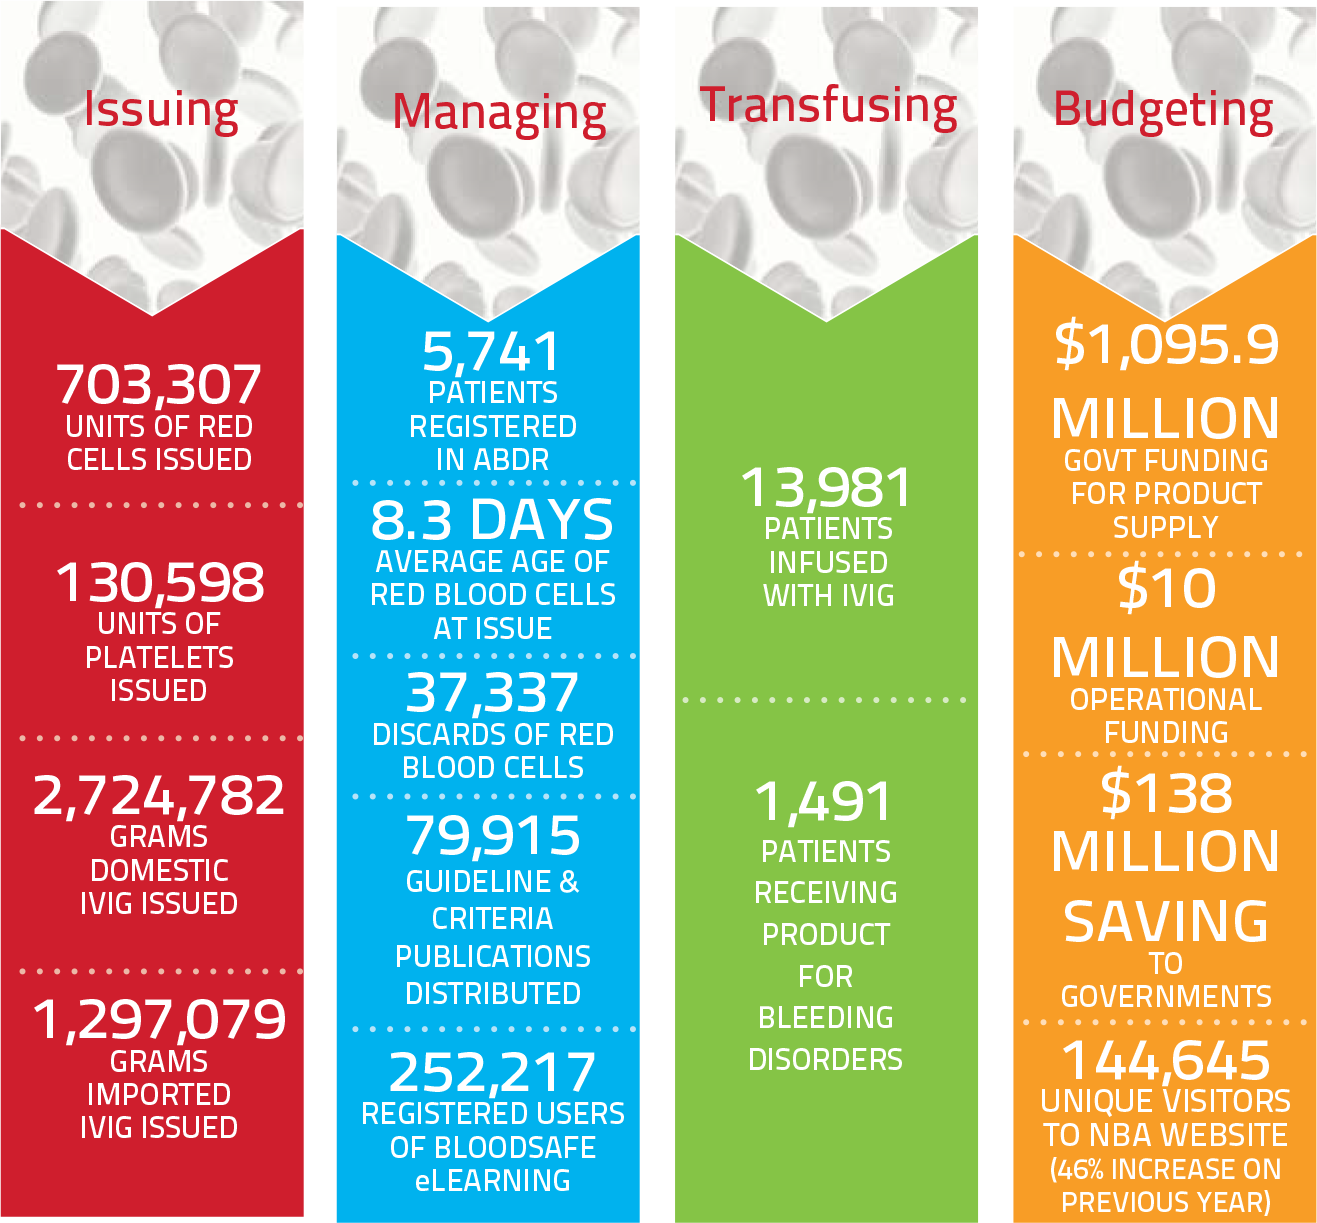 2013-14 snapshot of the blood sector- Issuing, Managing, tranfusing, Budgeting